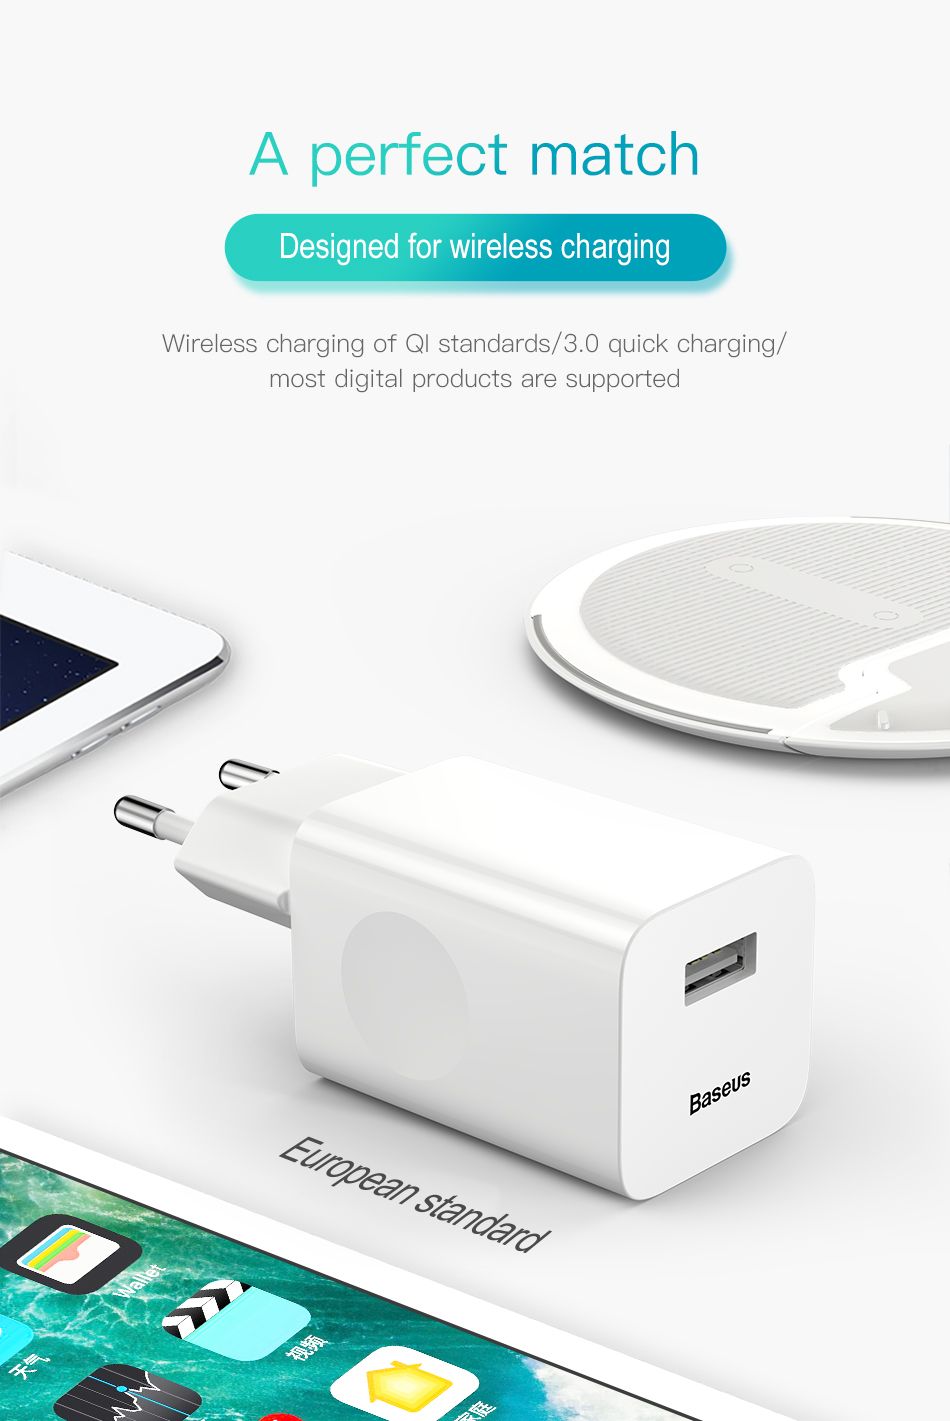 Baseus-24W-Travel-EU-Plug-Wall-Charger-for-Wireless-Charging-Quick-Charge-30-Smartphone-1287954